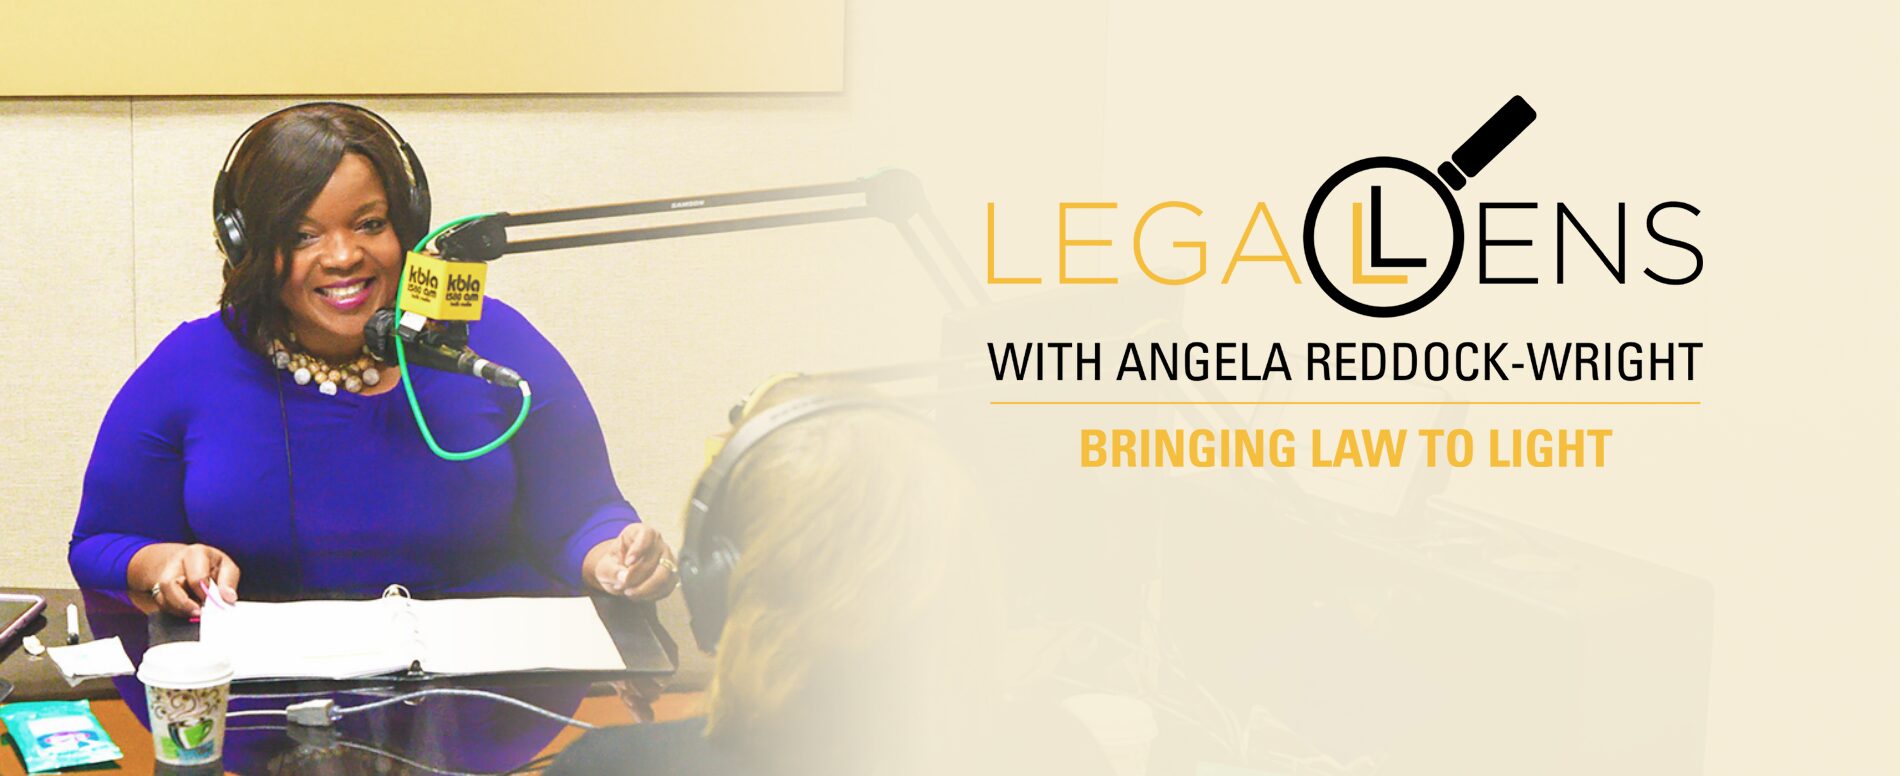 Legal Lens with Angela Reddock-Wright: Bringing Law to Light